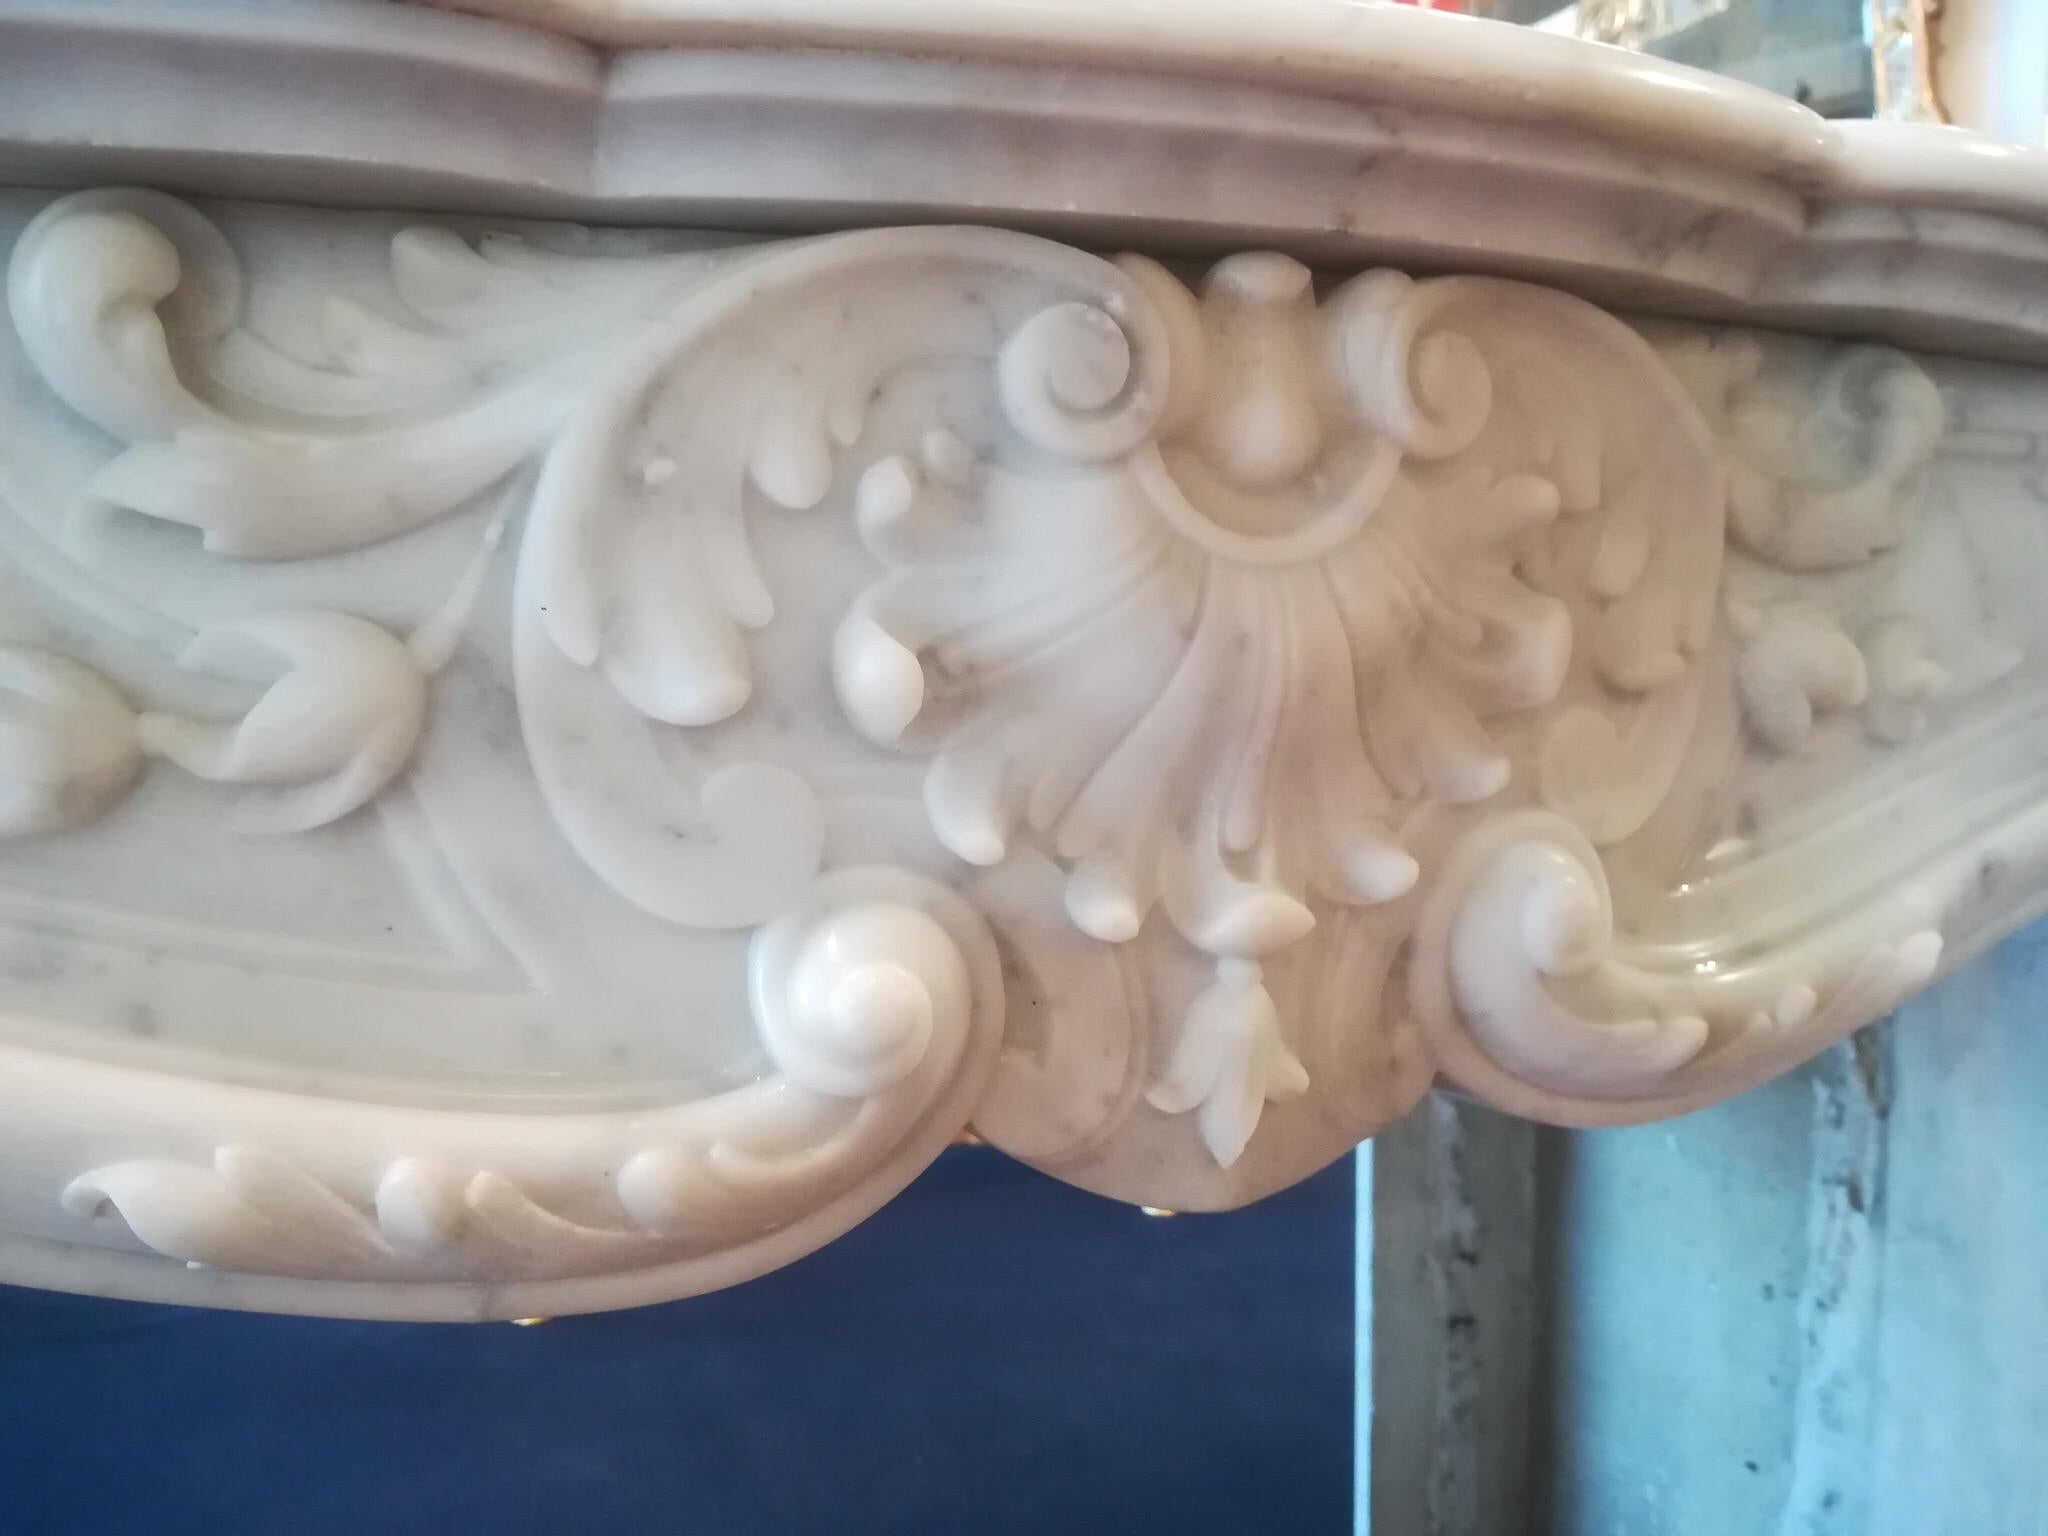 Louis XV style, 19th century,
Great fireplace mantel made in white Carrara marble.
Decor of richly decorated shells.

Dimensions of the fireplace hearth: Width 93 cm / height 88 cm.

   